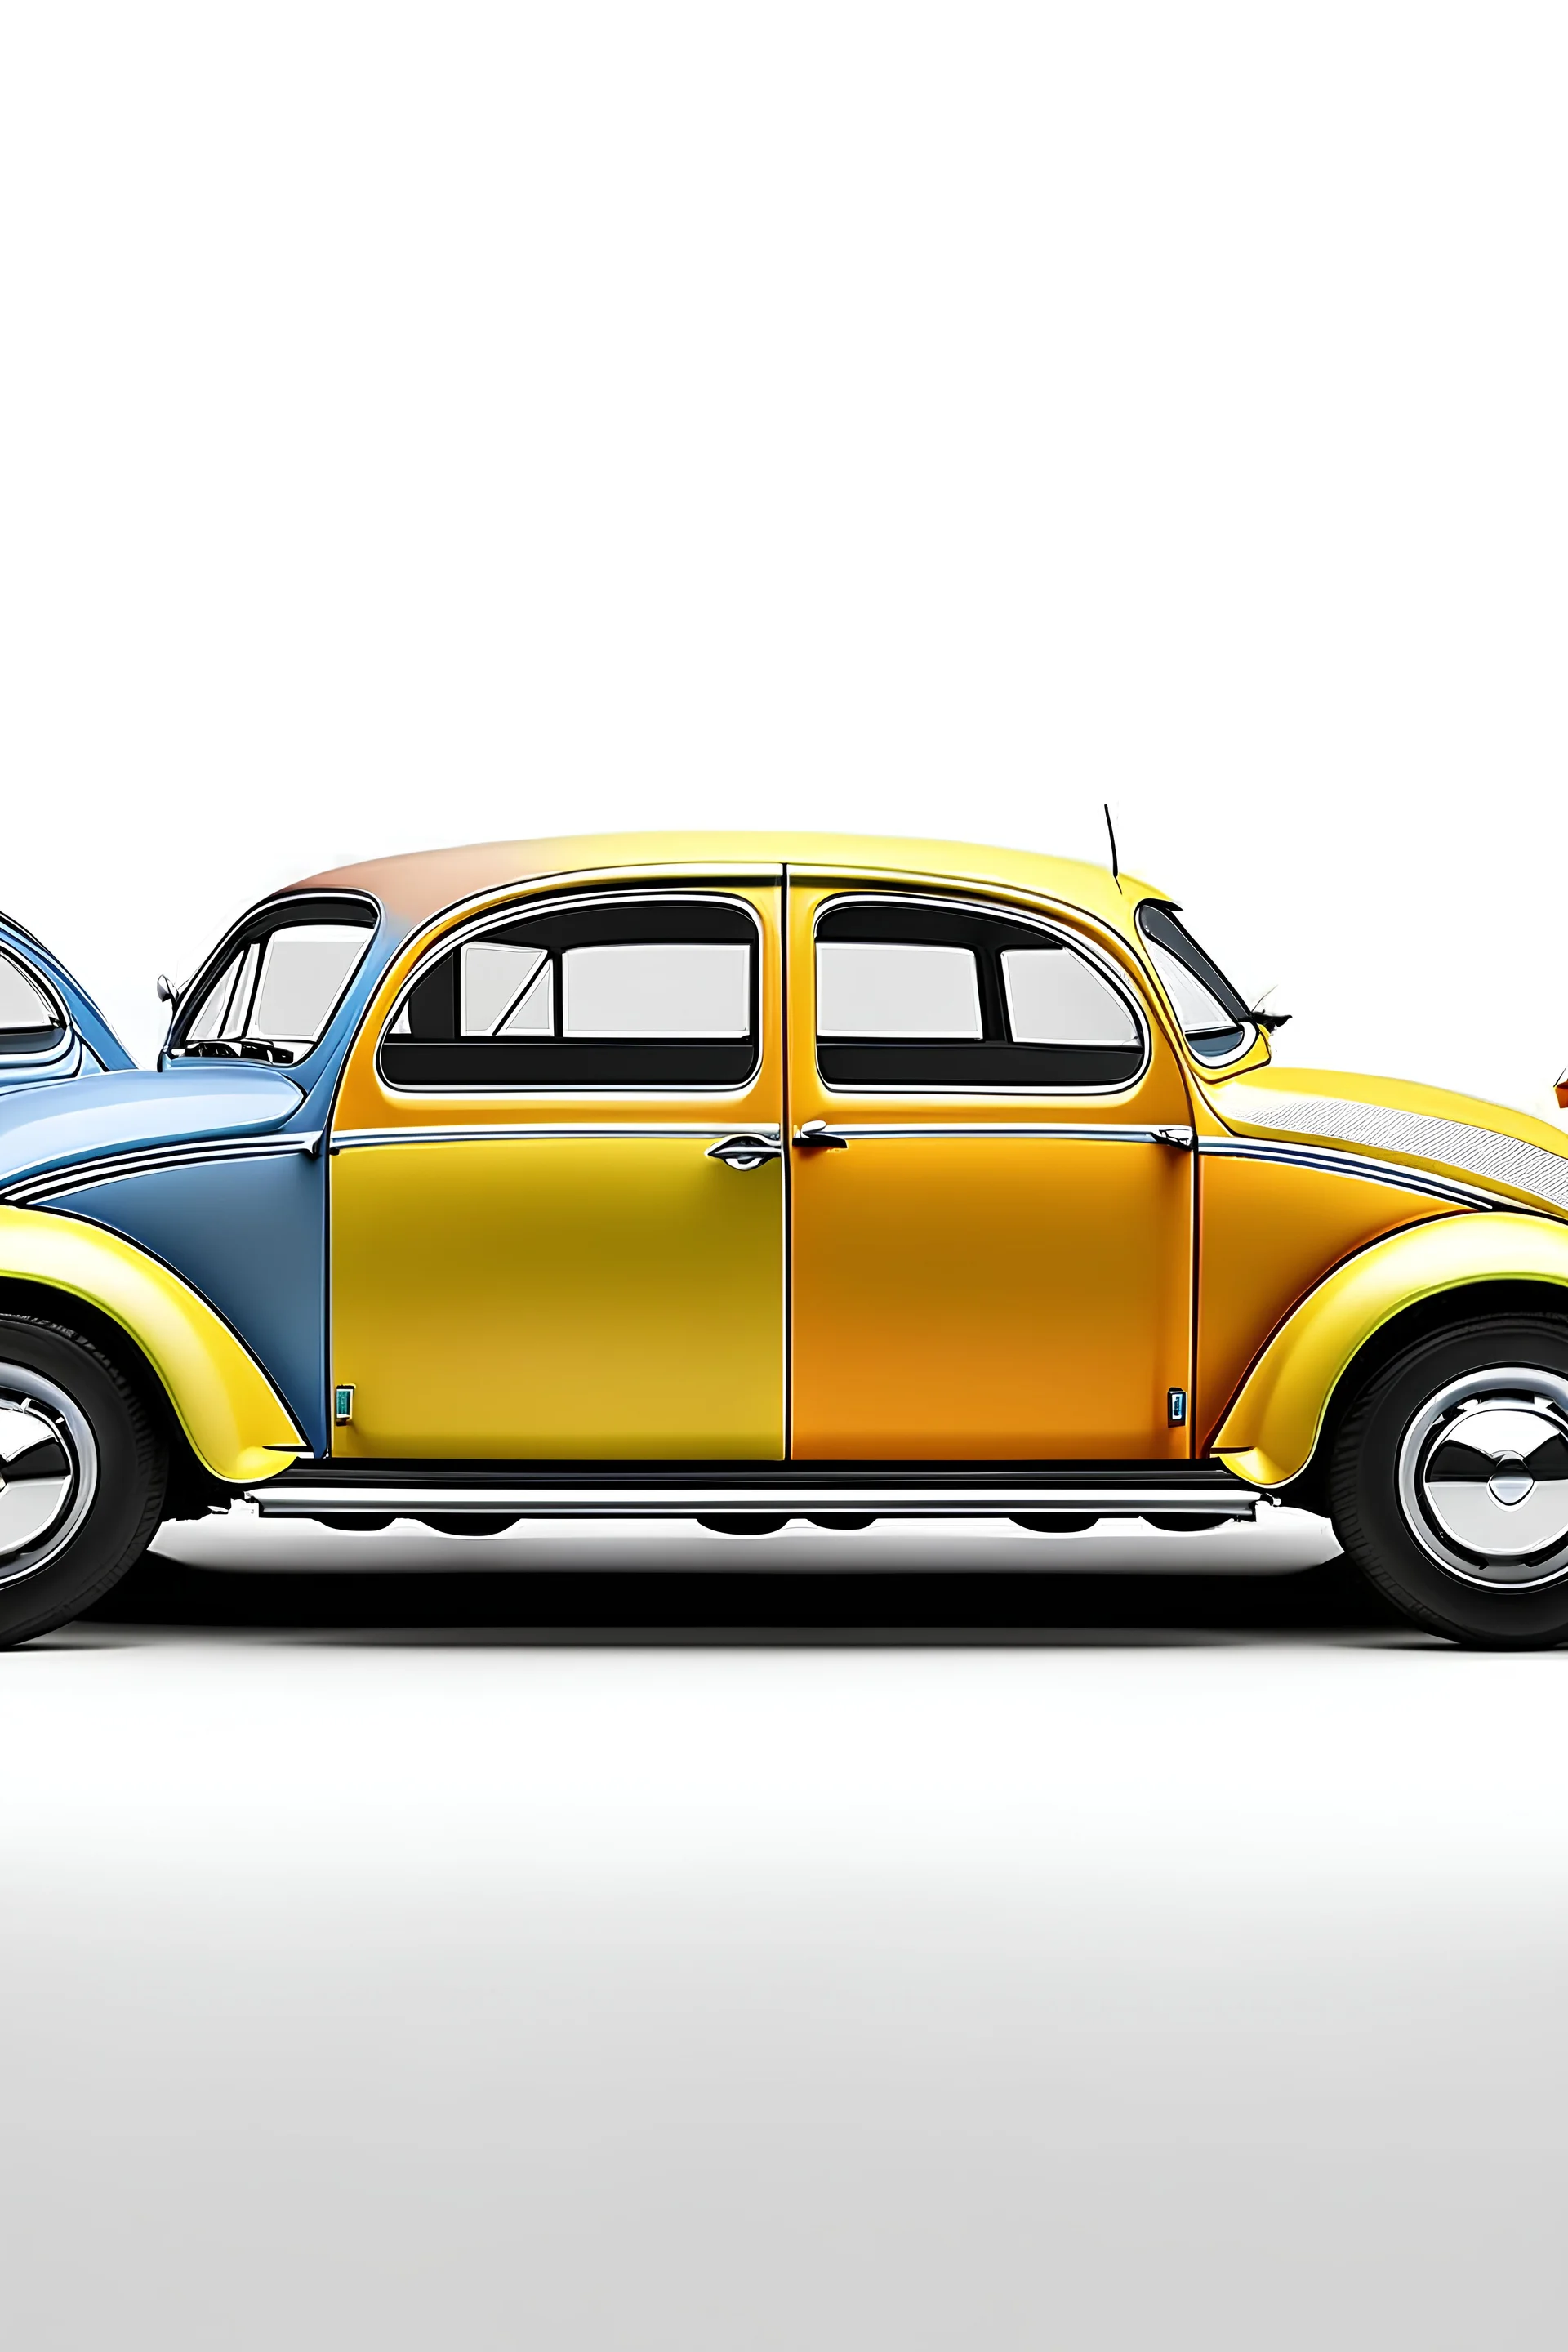 A Volkswagen beetle, front view and side view of front 4 different angle views. Bright colors High Resolution, light background.